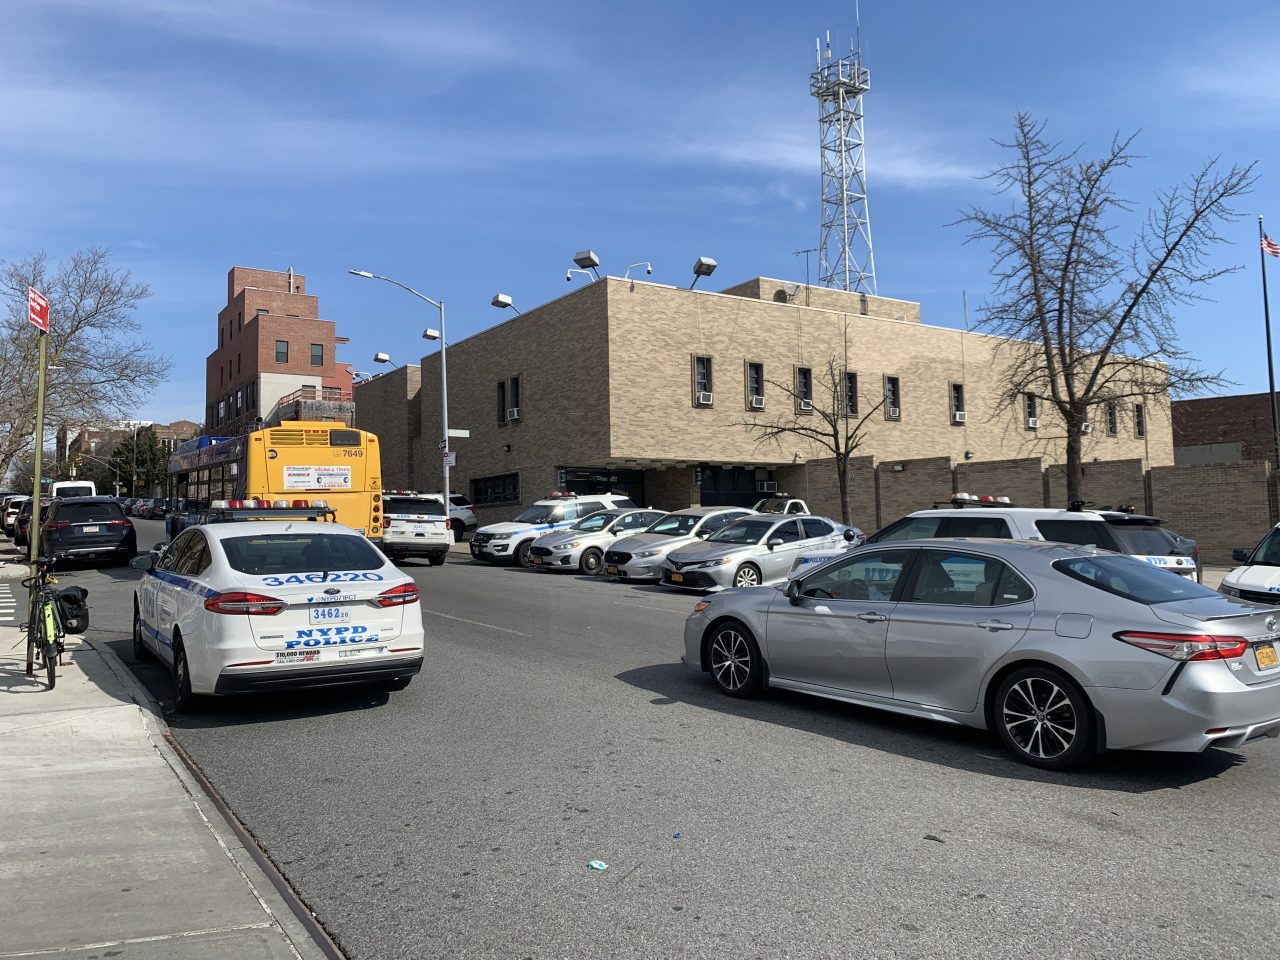 The 71st Precinct station house is on New York Avenue (yes, it has a bus route on it) and Eastern Parkway, both busy streets. Photo: Gersh Kuntzman